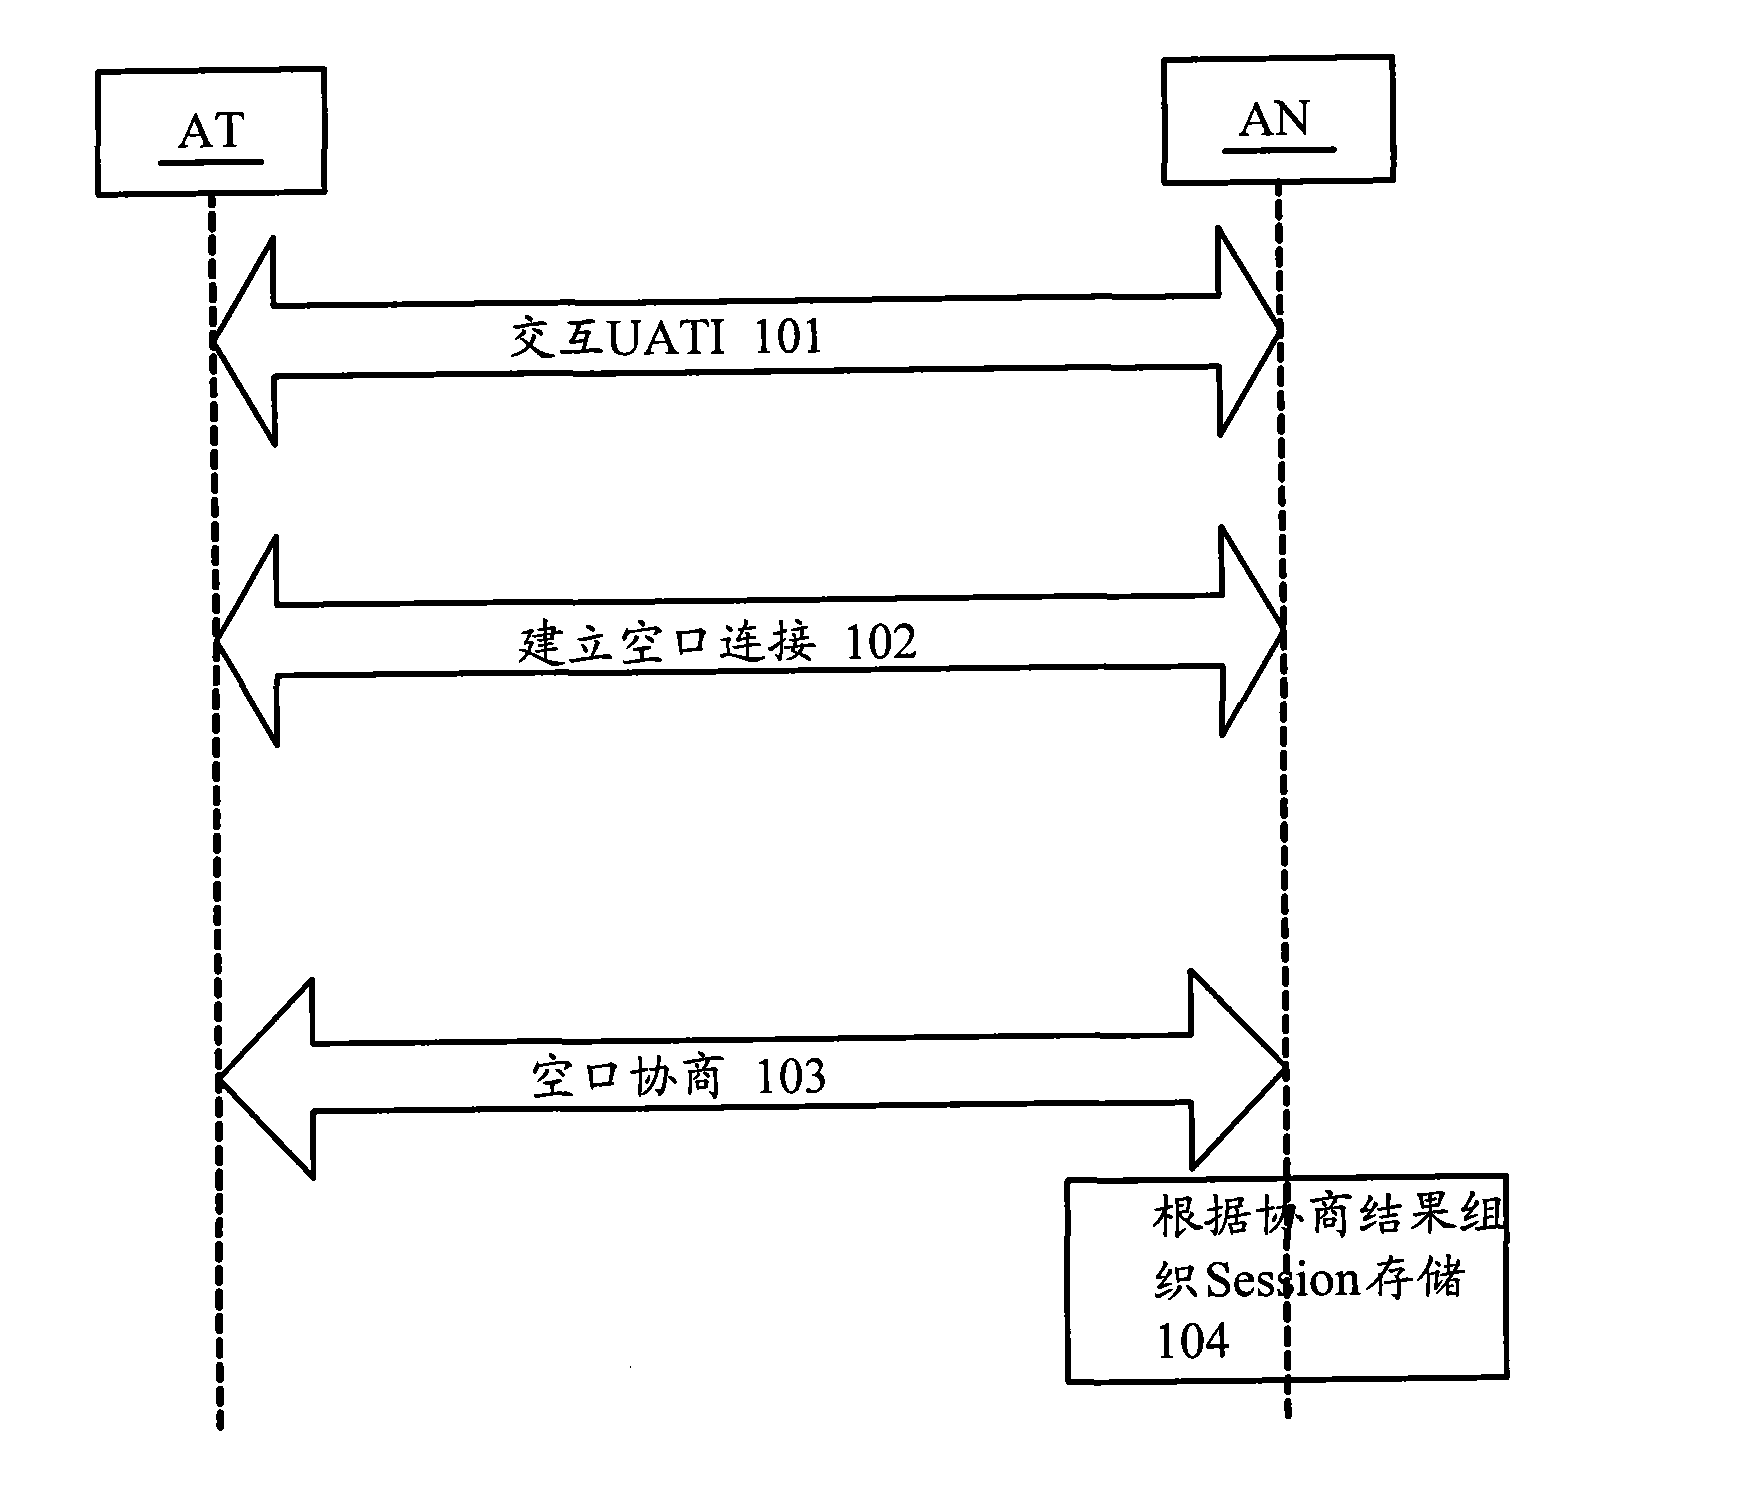 Session information storage method and access network equipment